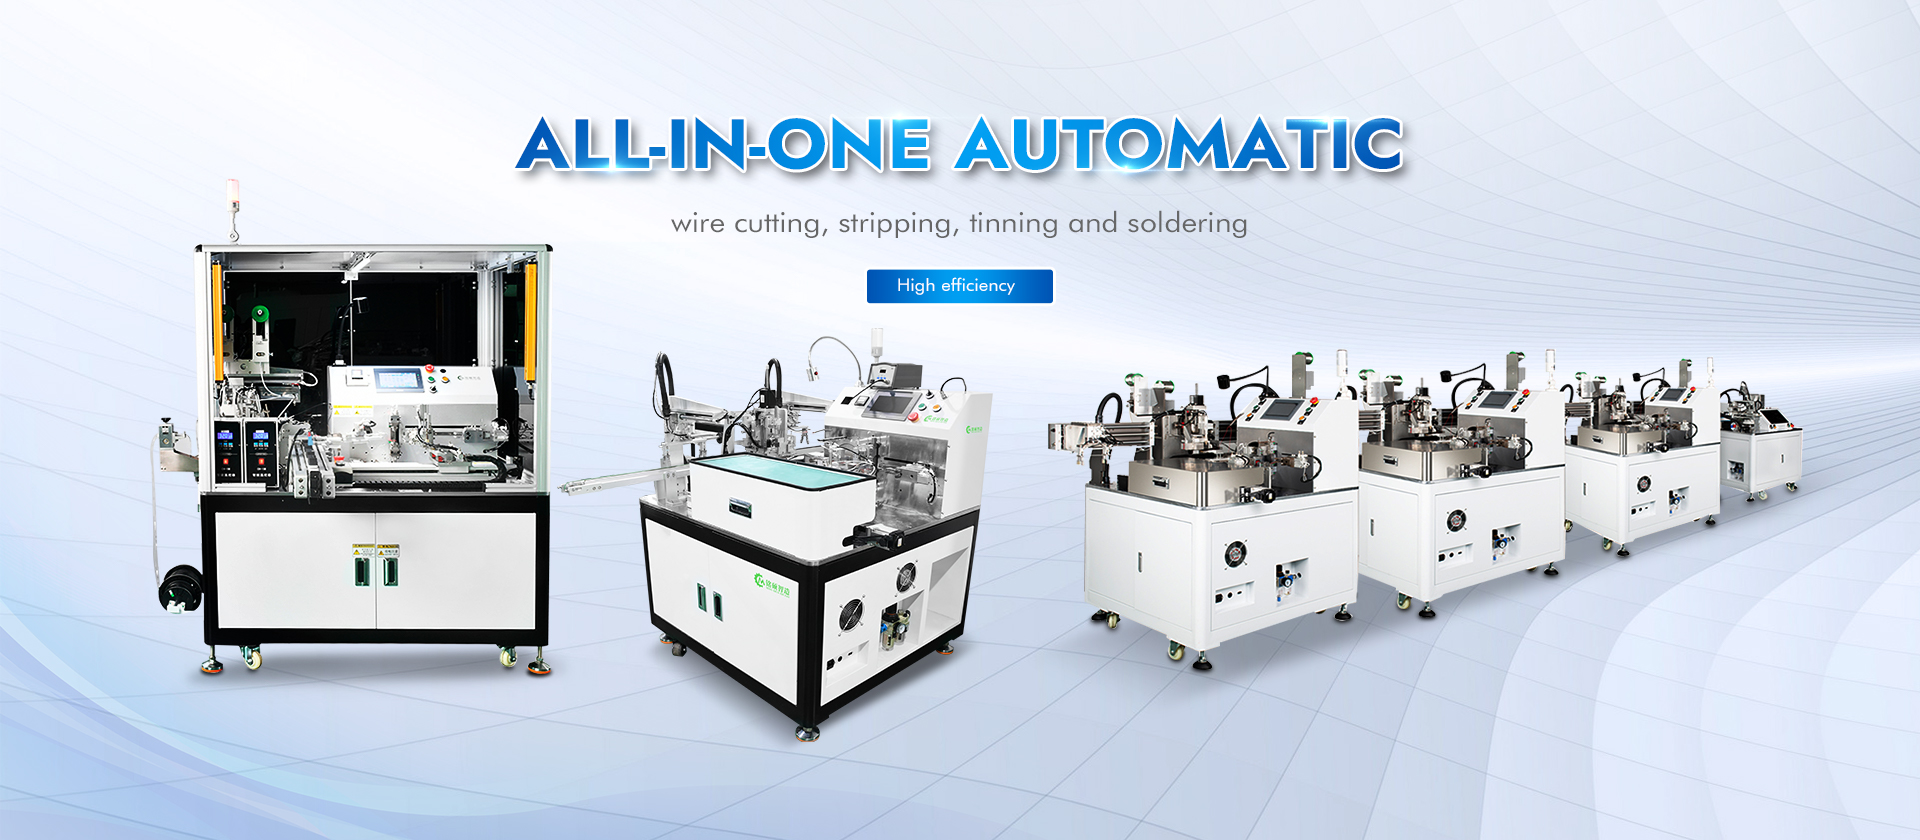 Allinne Automatic Wire Cutting, Stripping, Tinning and Soldering